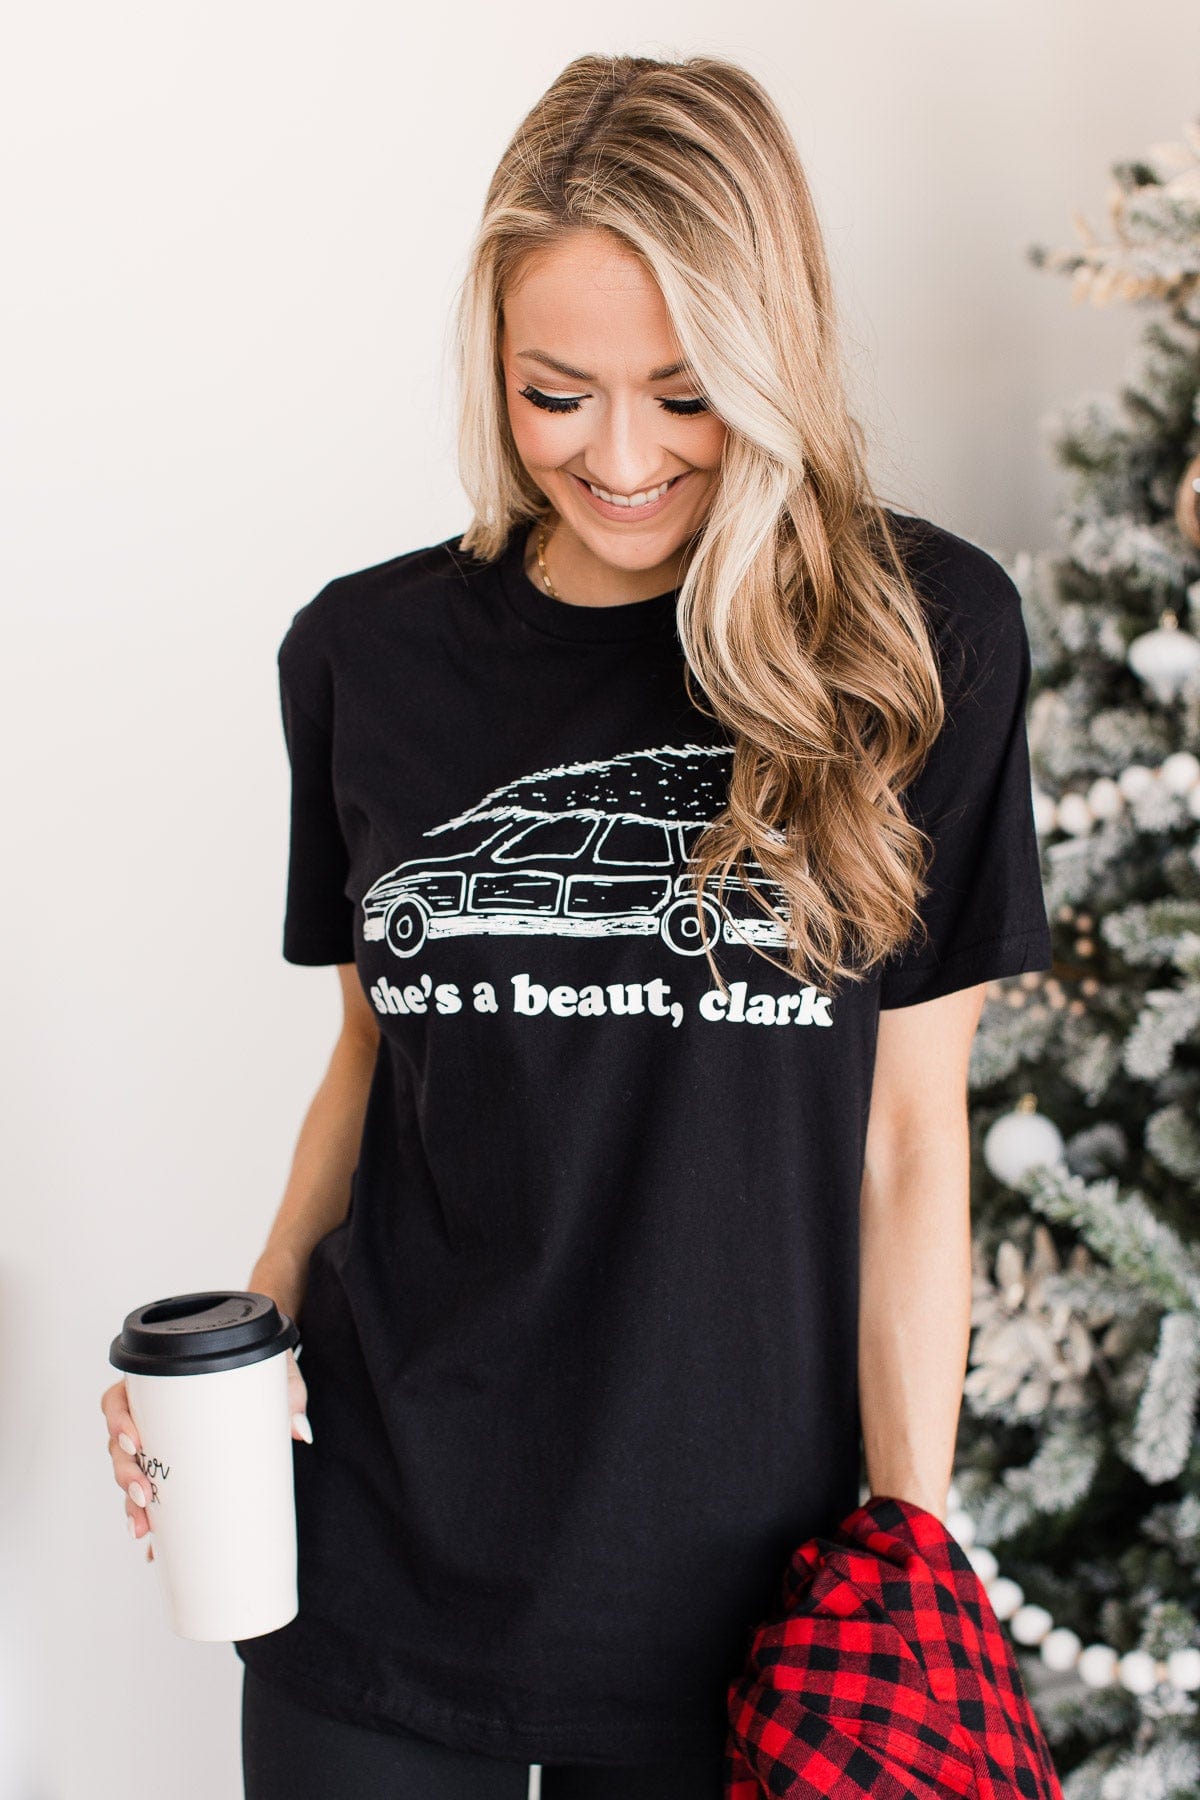 "She's A Beaut, Clark" Graphic Tee- Black